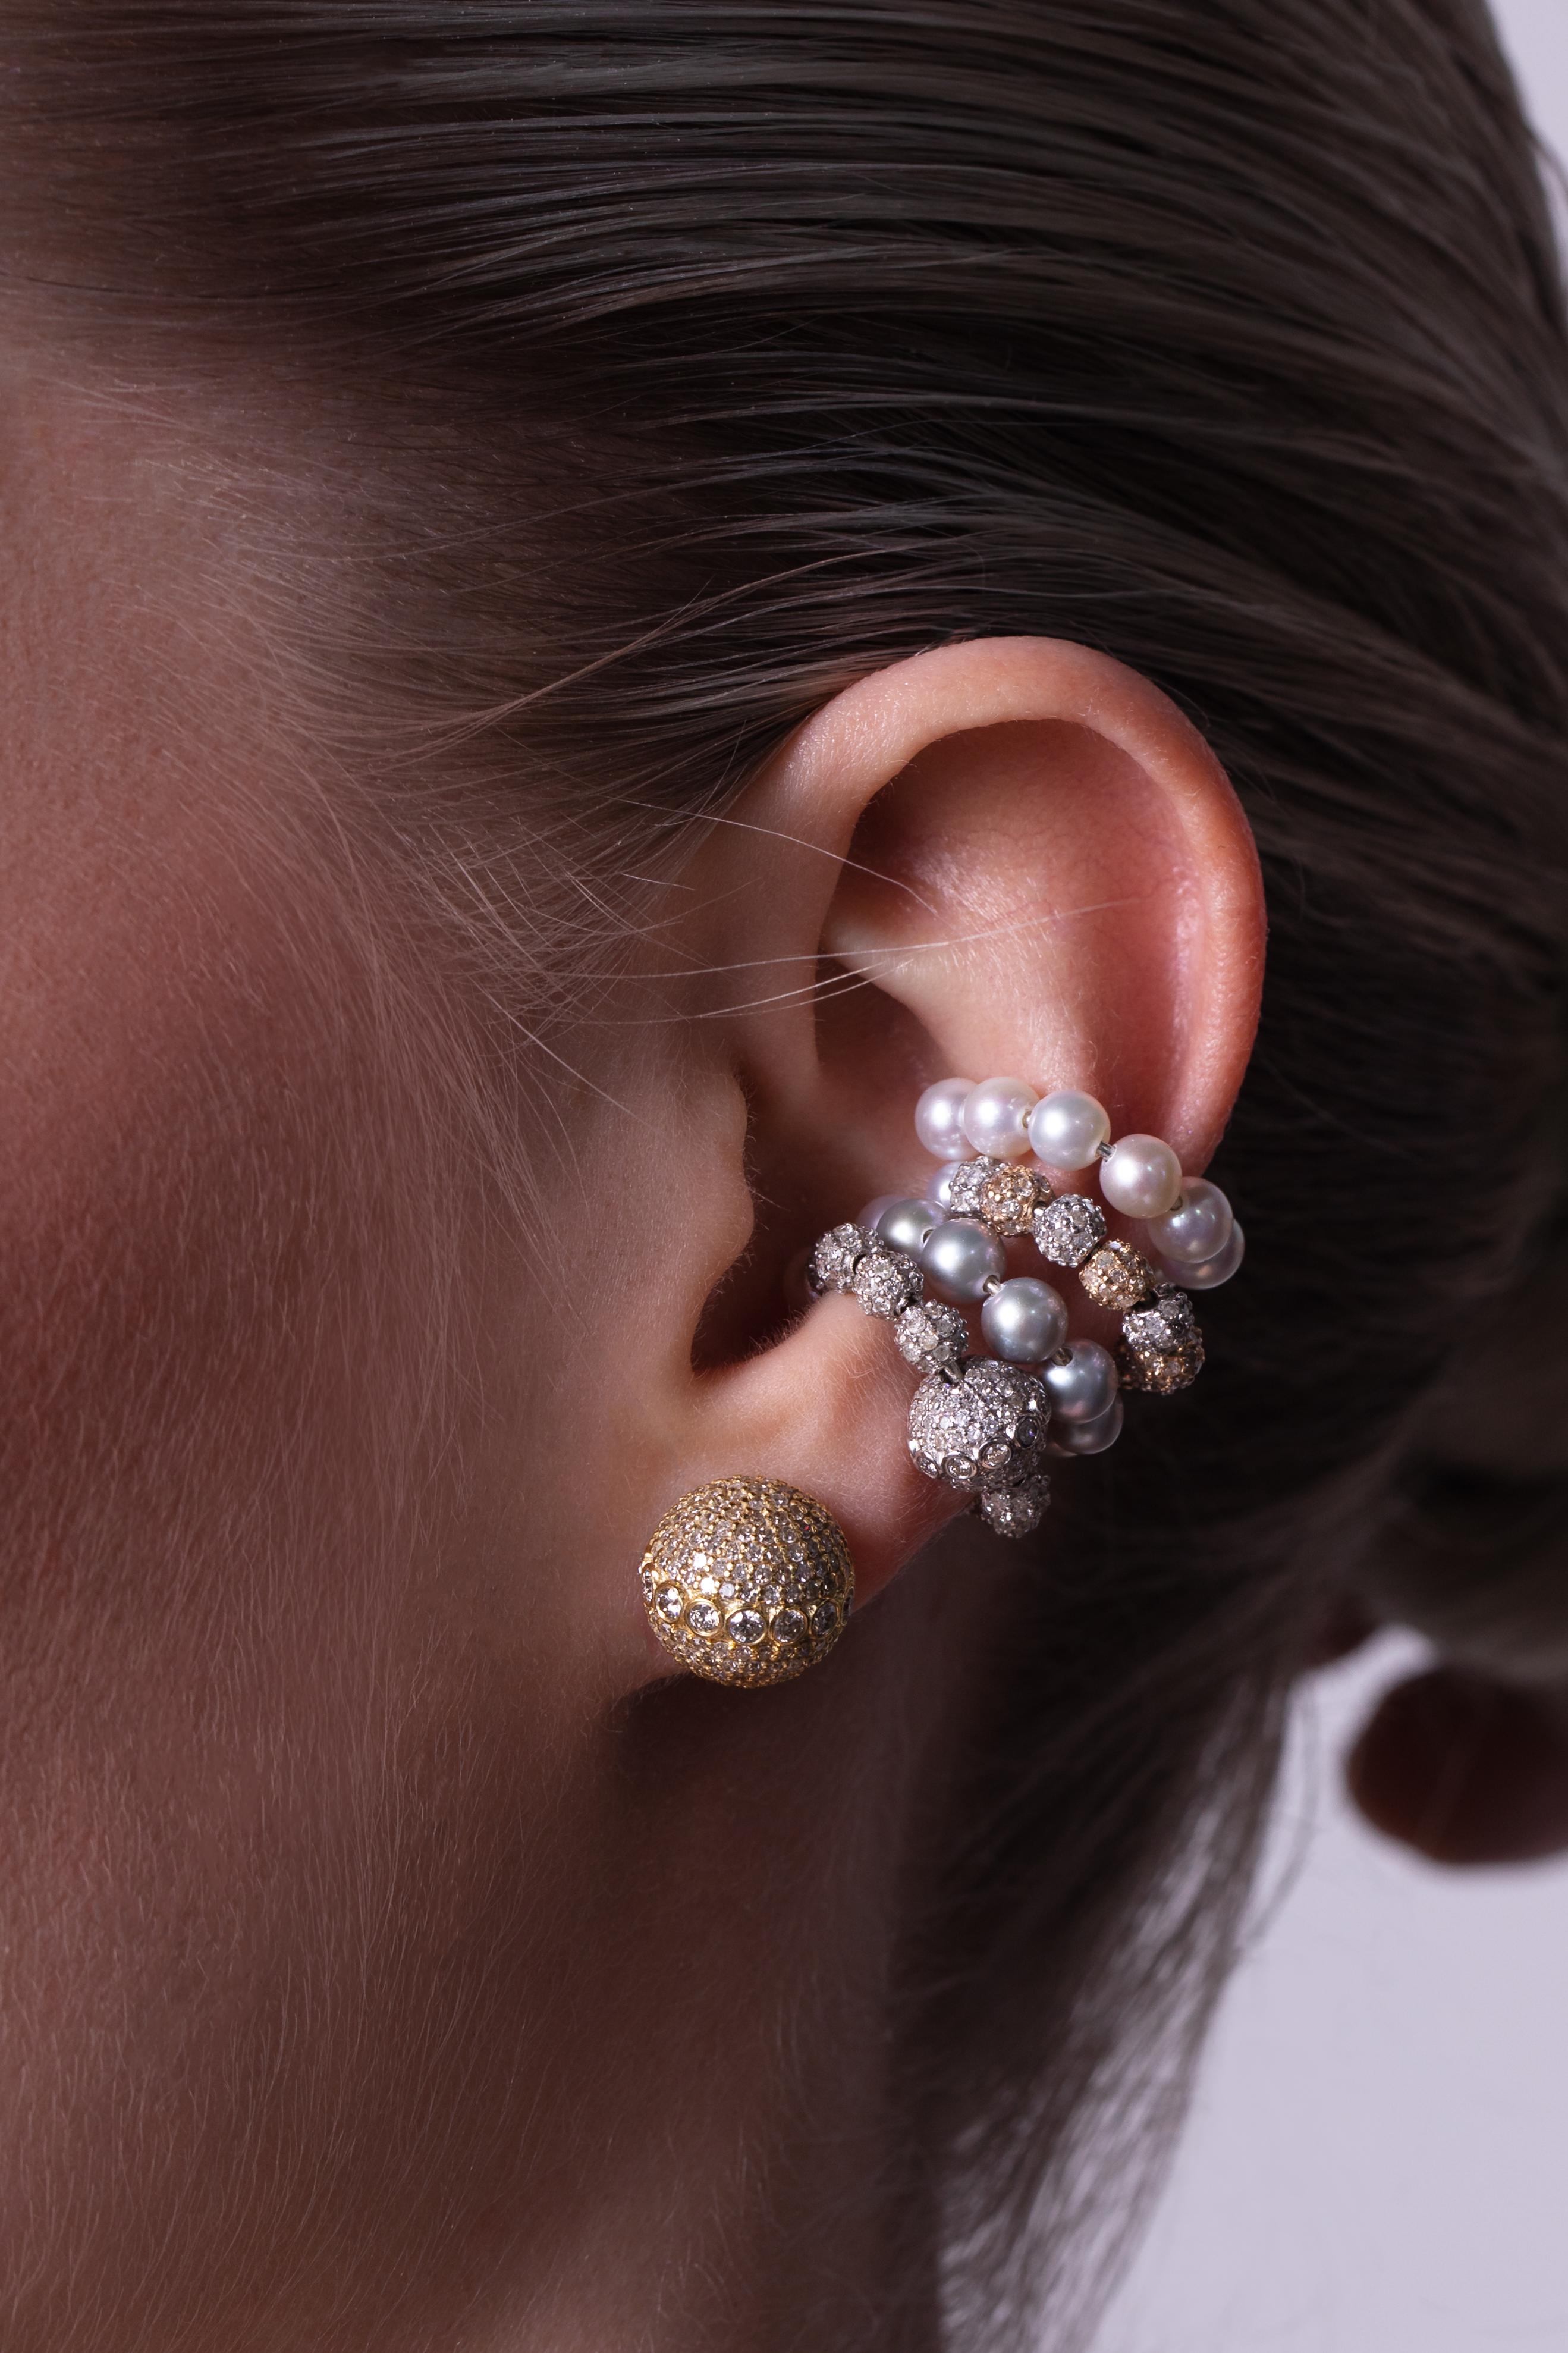 Brilliant Cut 18k Yellow Gold Encrusted Diamonds Ear Cuff with a large sphere and Akoya pearls For Sale